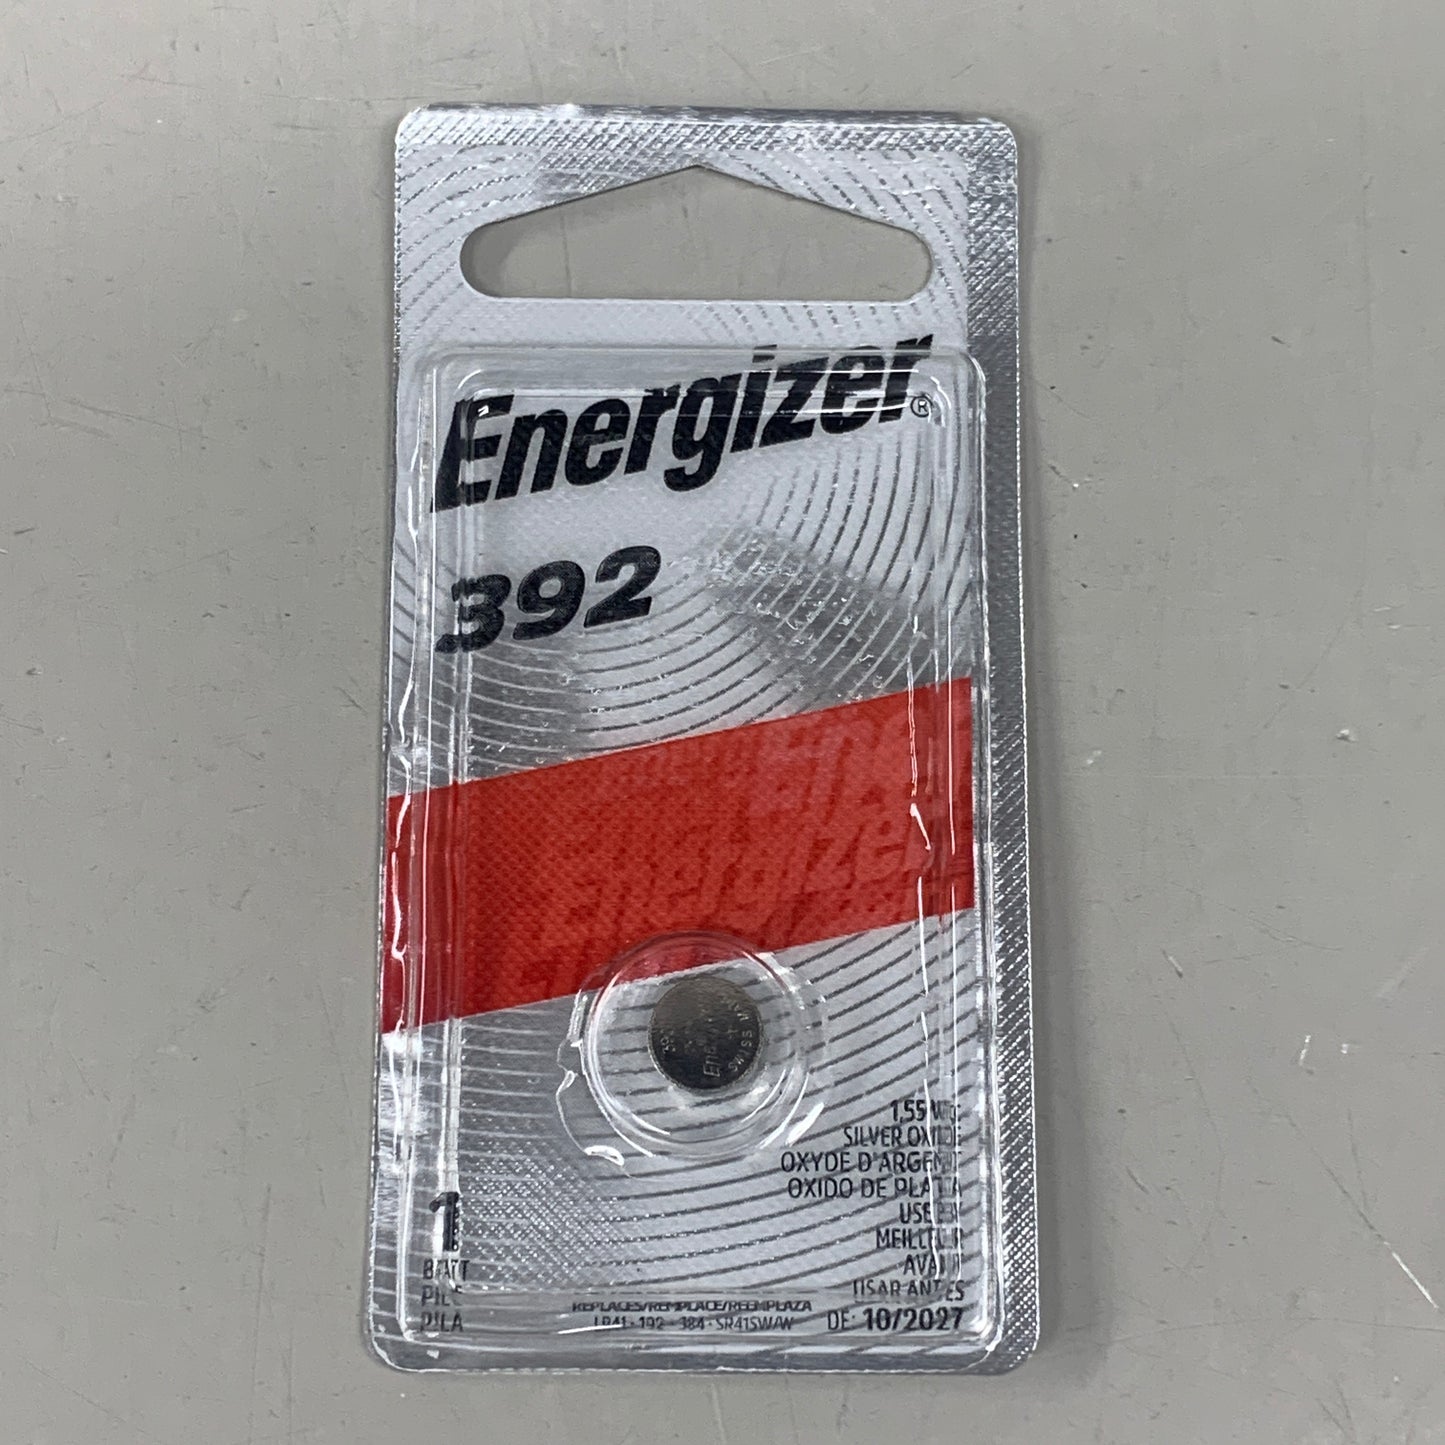 ENERGIZER (4 PACK) Silver Oxide Button Battery 392 1 Pack (4 Total Batteries) 392BPZ